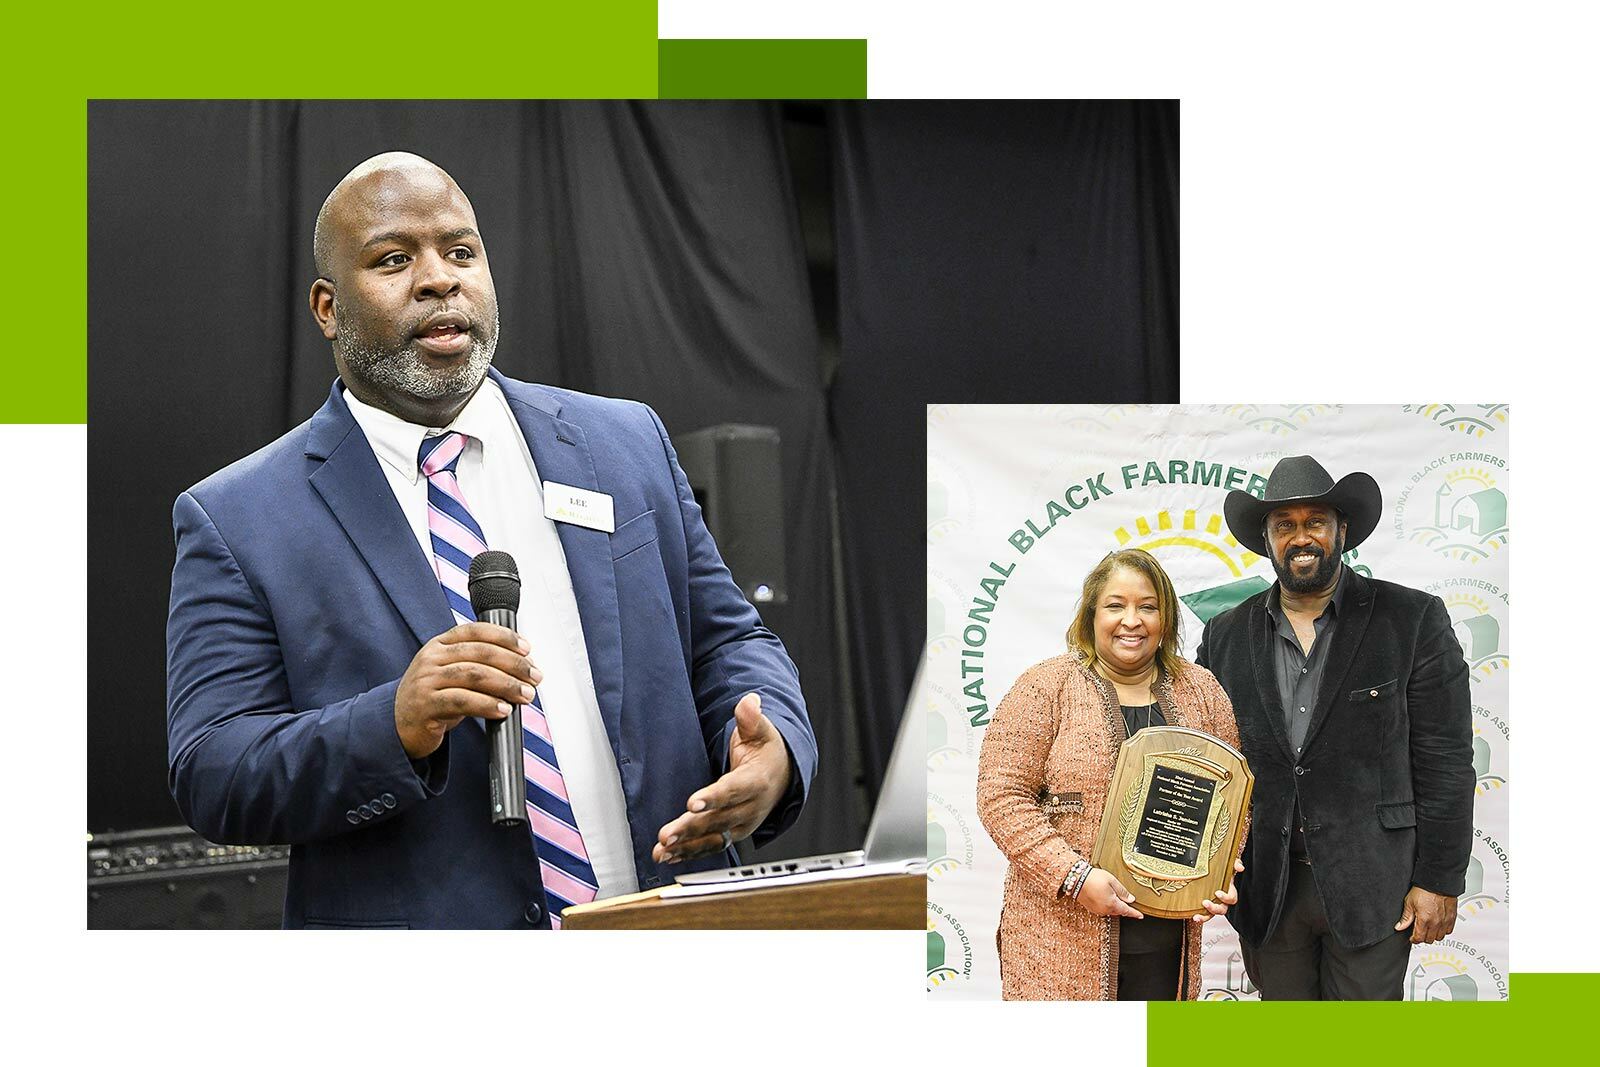 photos from National Black Farmers Conference and award presentation